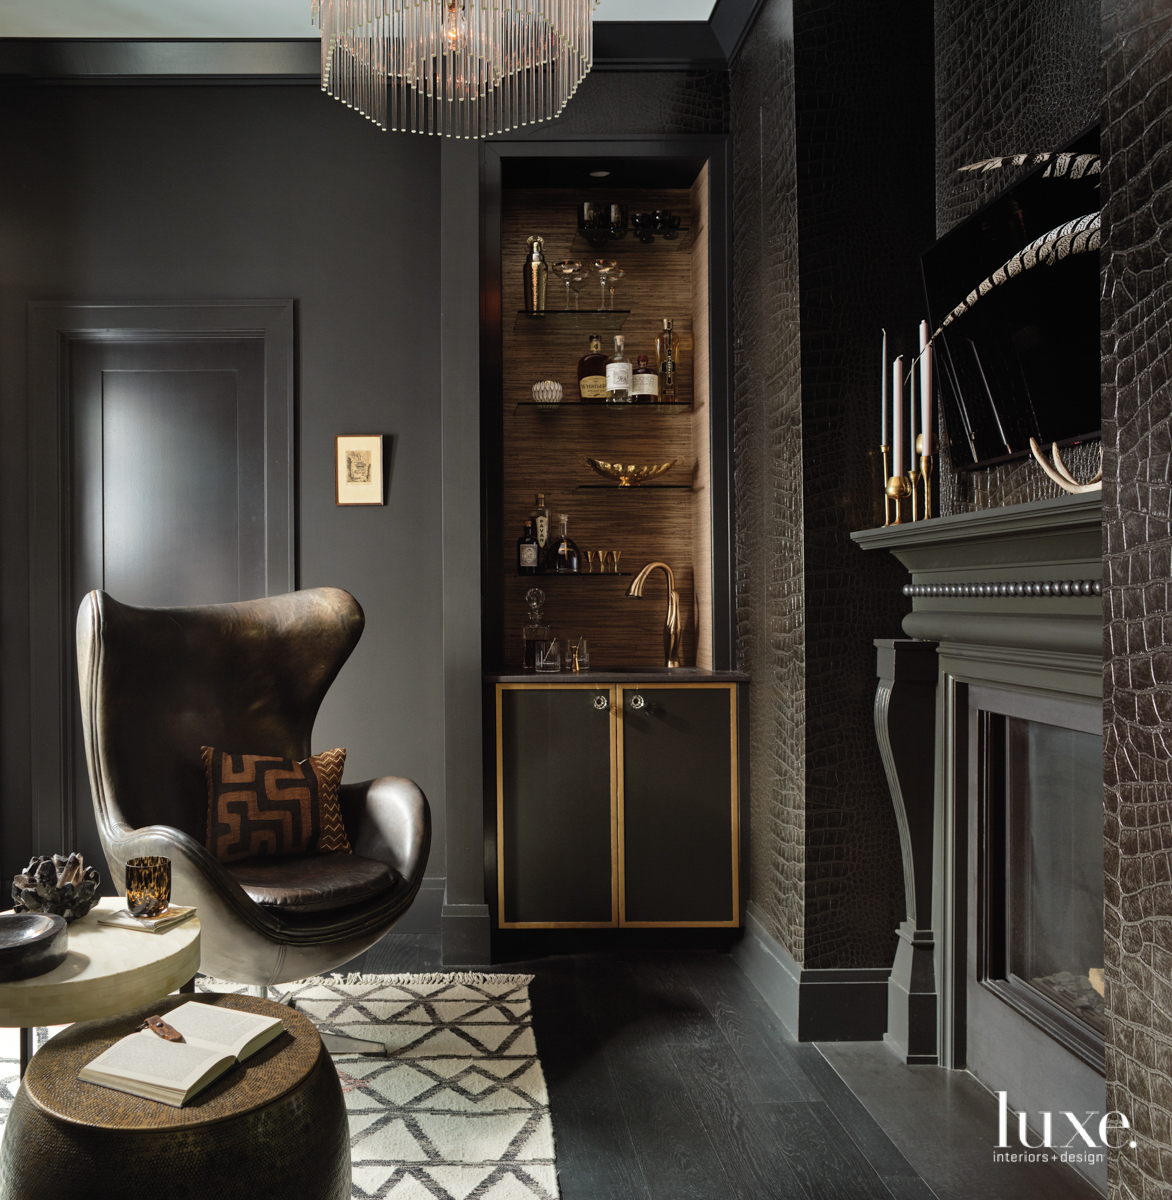 Deep Tones And Moody Wallpaper Add Drama To A Renovated Oregon Bungalow -  Image 3 - Luxe Interiors + Design